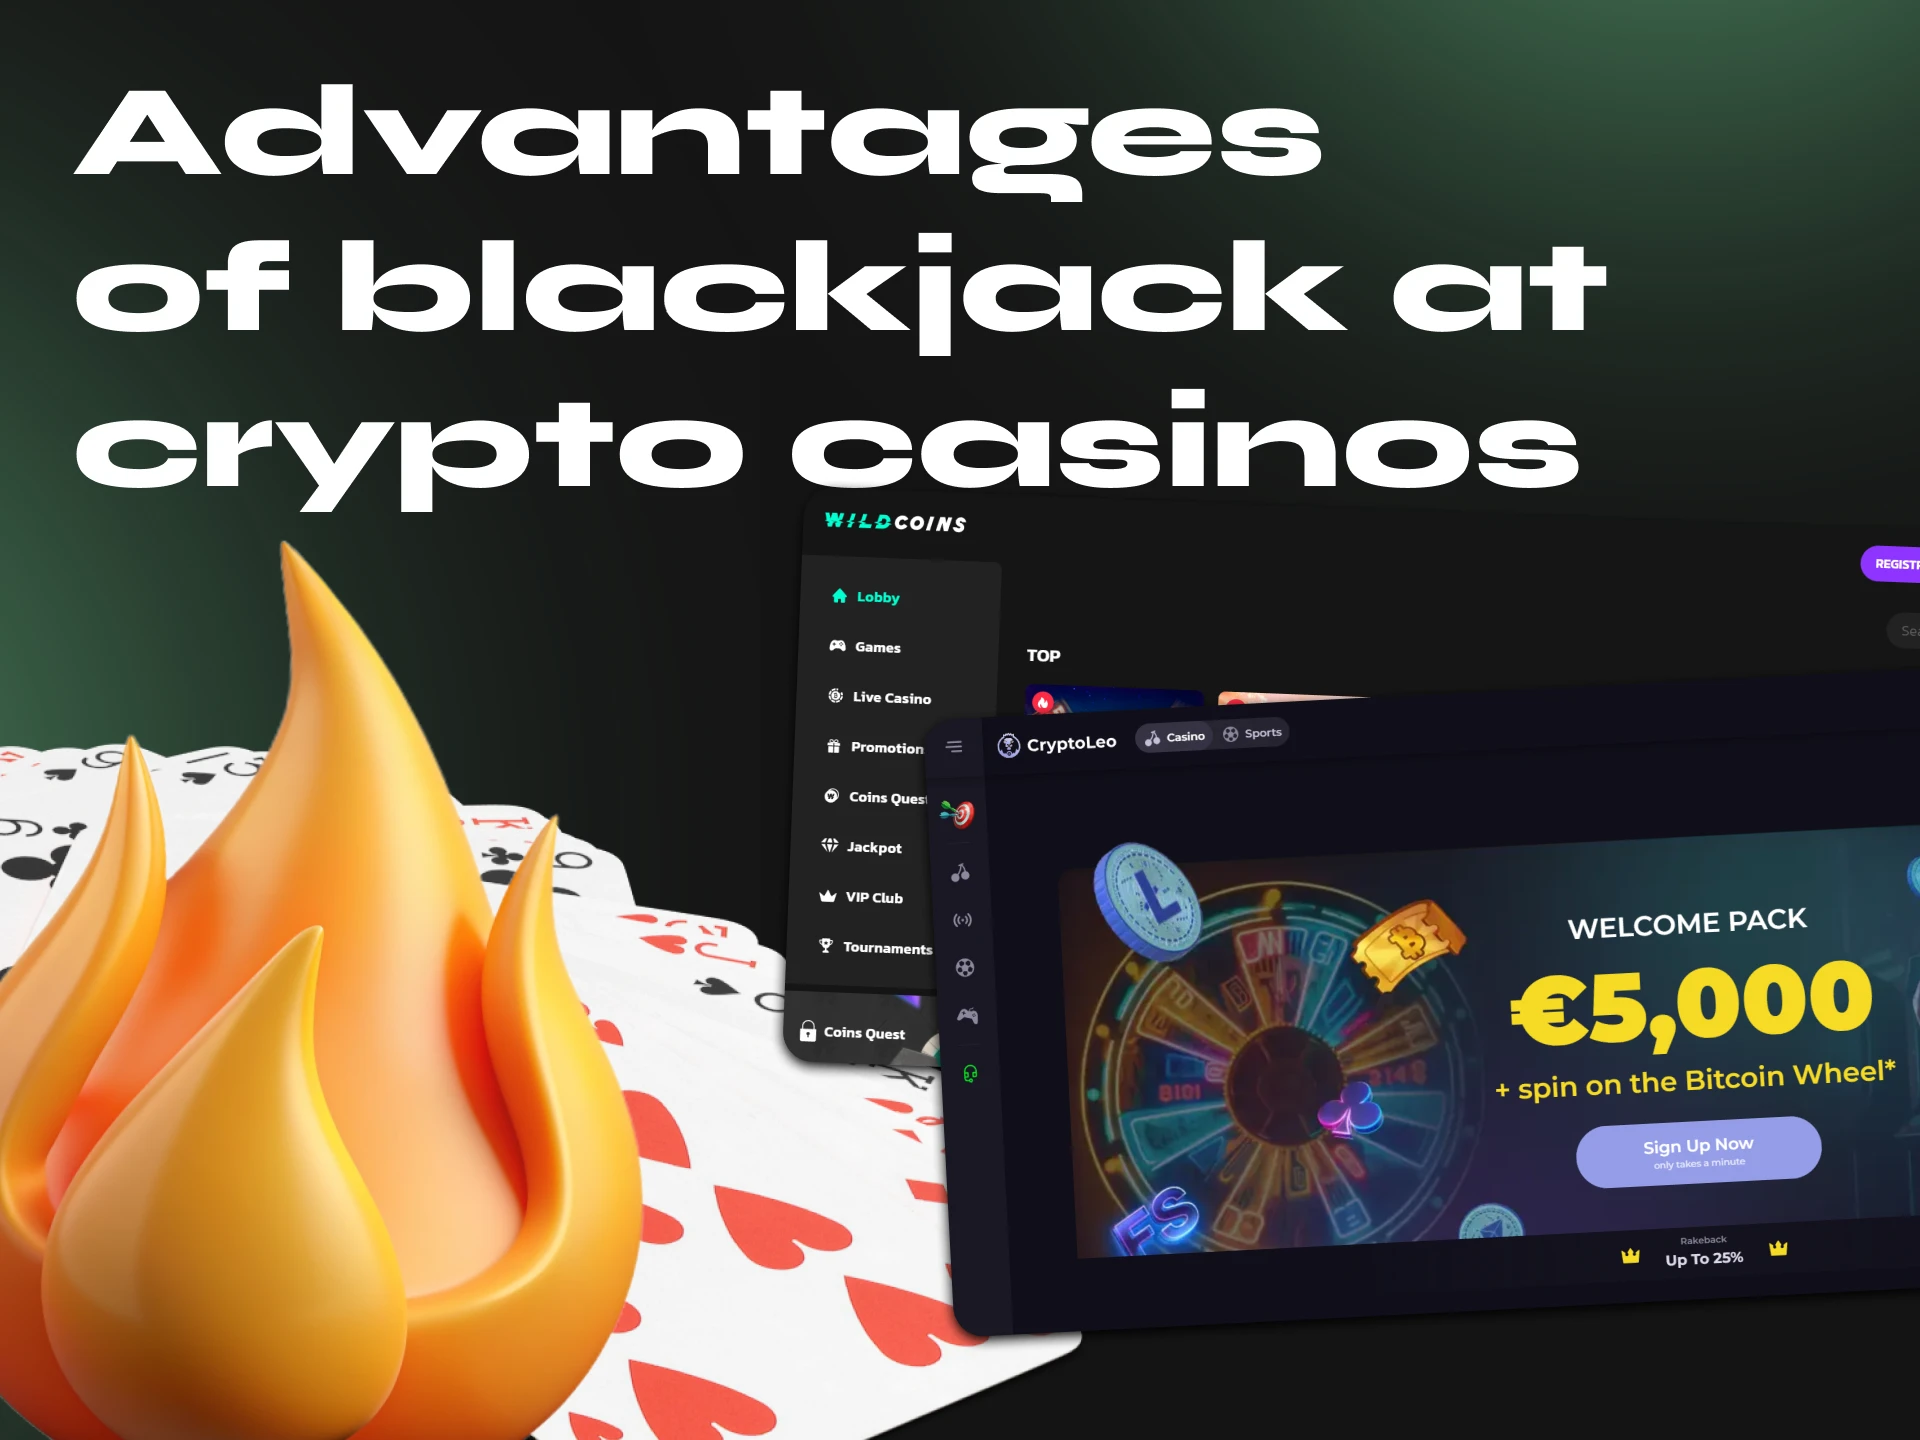 Playing blackjack with cryptocurrency is the best way to win.